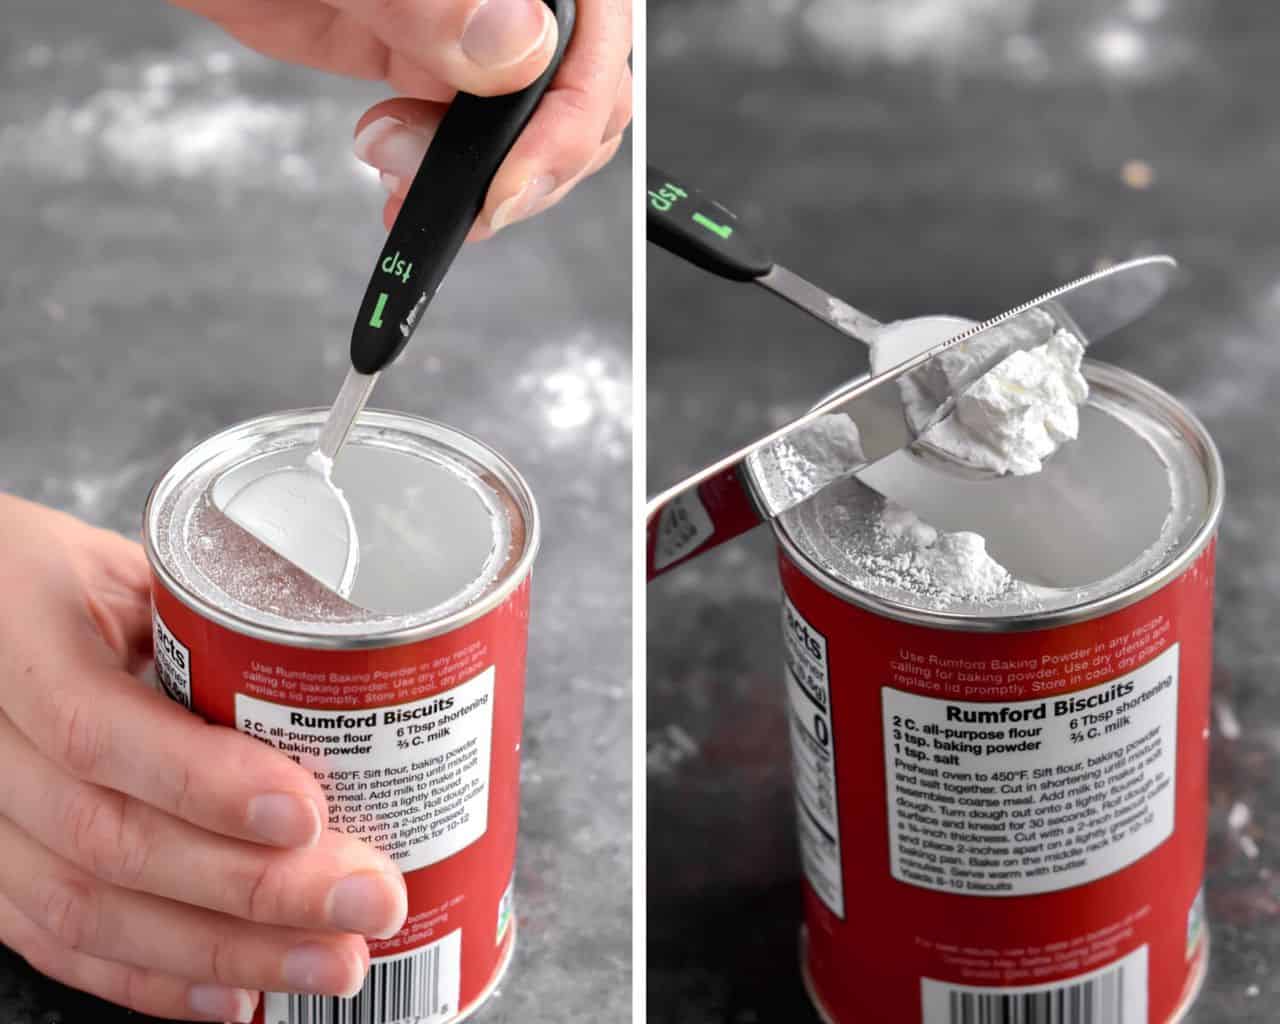 Two photos showing the ways to measure baking powder